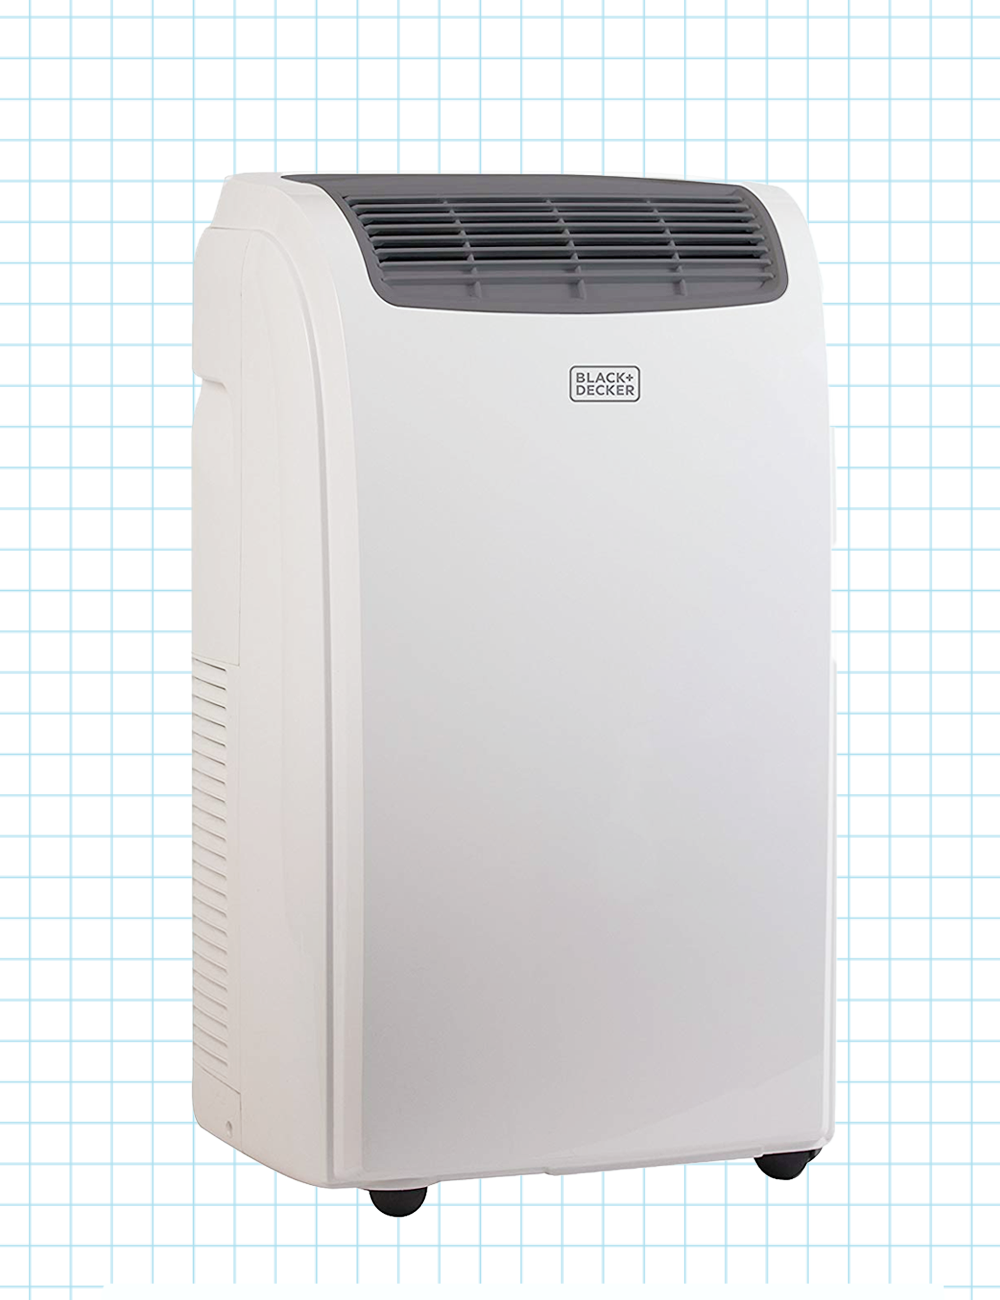 9 Best Portable Air Conditioners To Buy In 2020 Top Rated